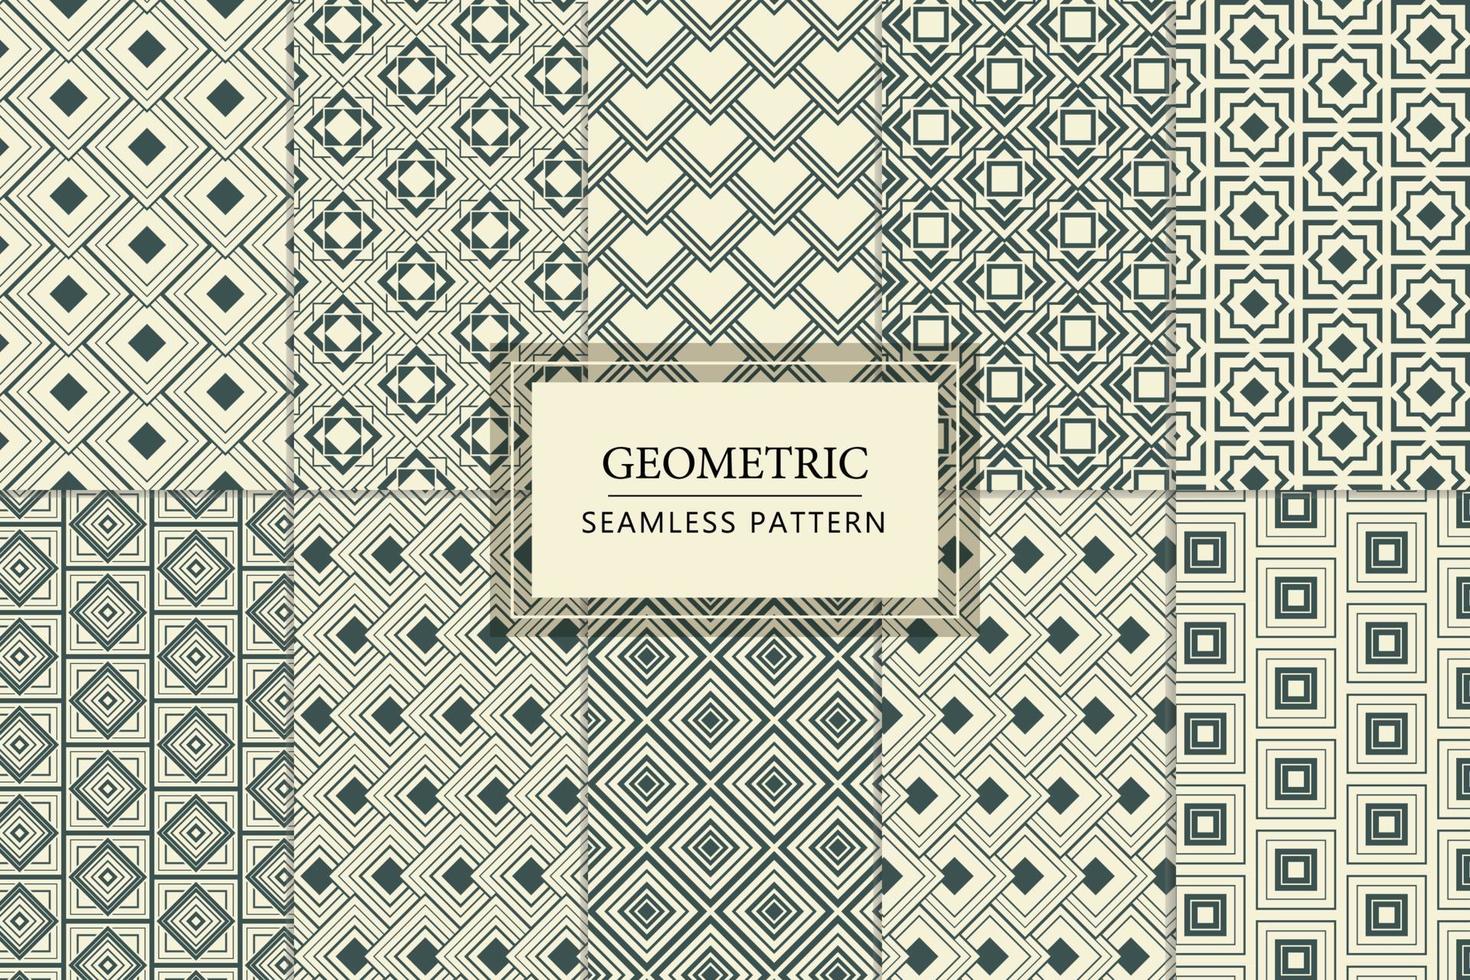 Collection of geometric ornamental seamless repeat pattern square tile design vector